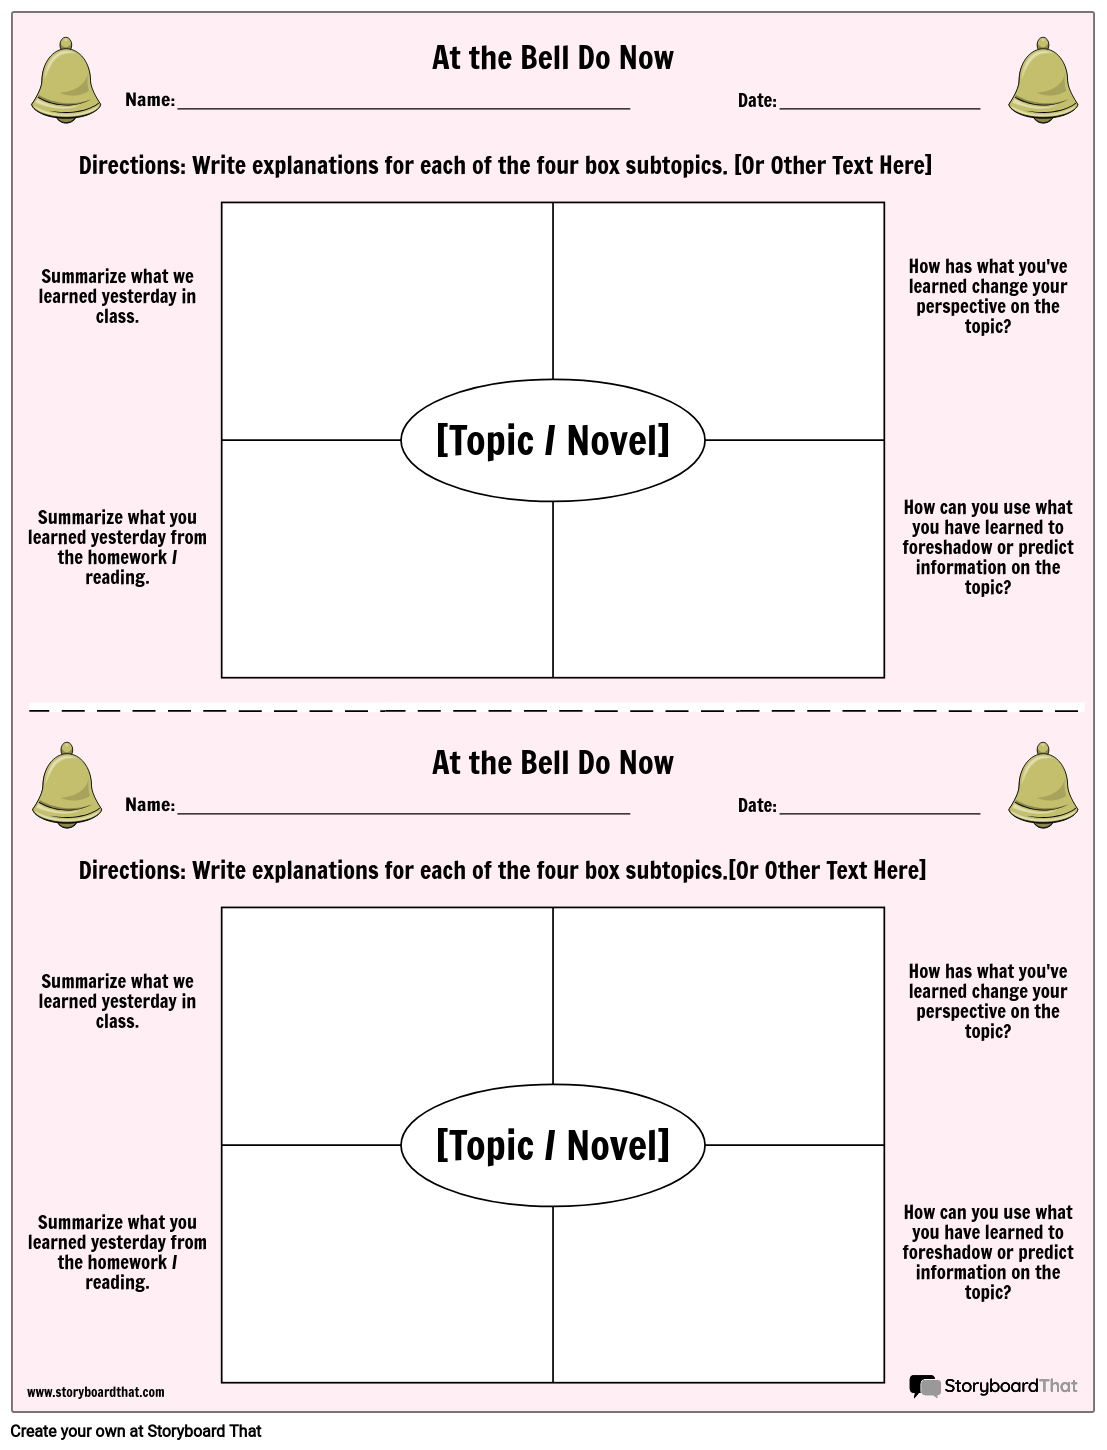 English worksheets: Four Square Template Graphic Organizer Writing Prompt